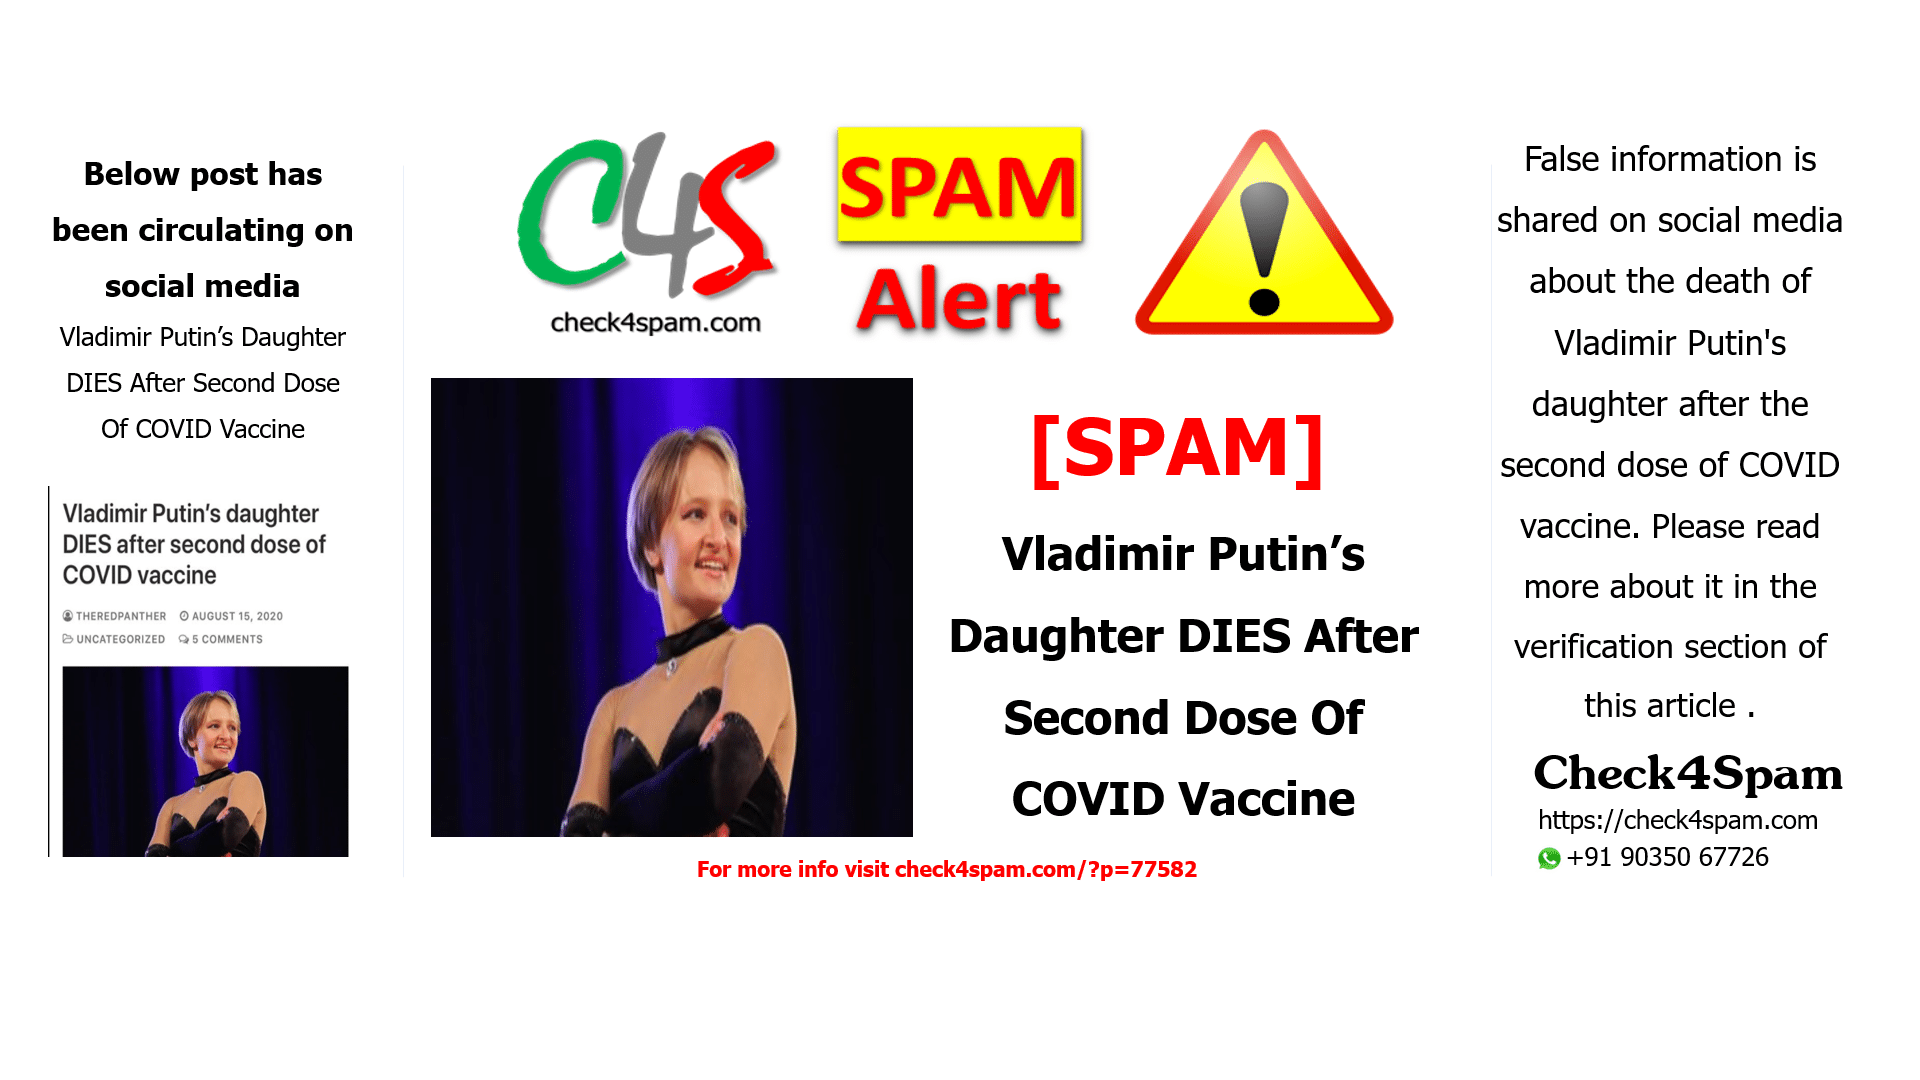 Vladimir Putin’s Daughter DIES After Second Dose Of COVID Vaccine